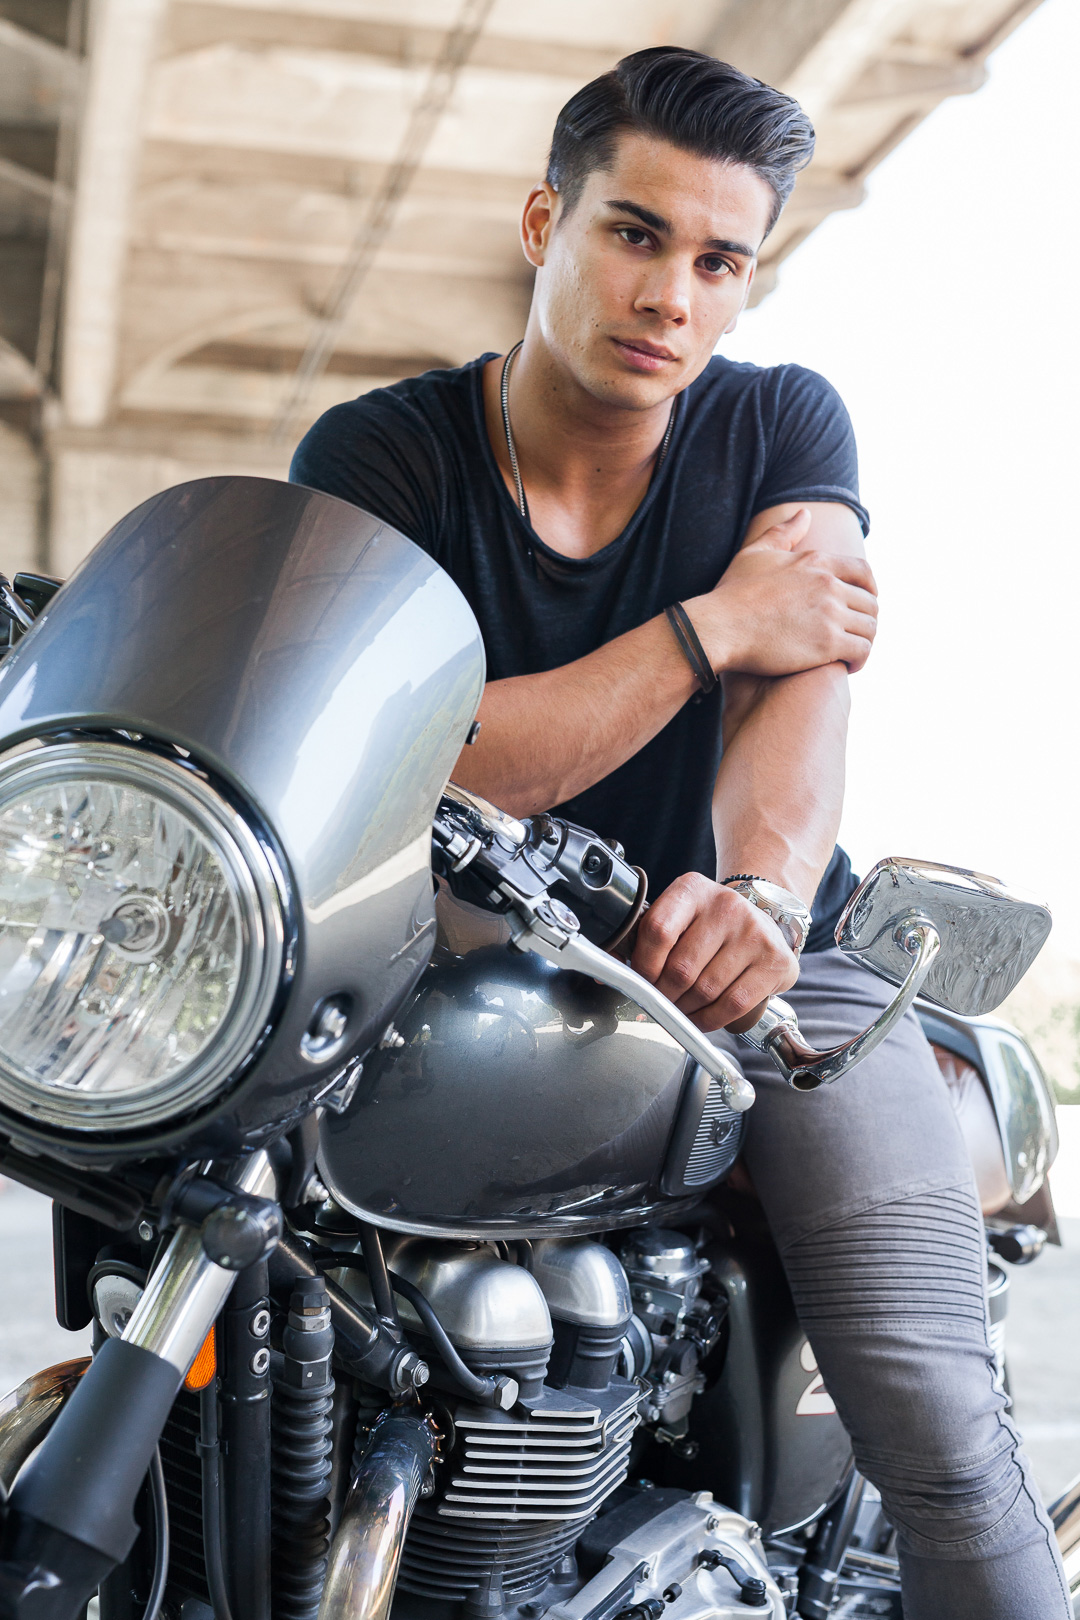 Editorial image of actor Drew Ray Tanner on a Triumph motorcycle